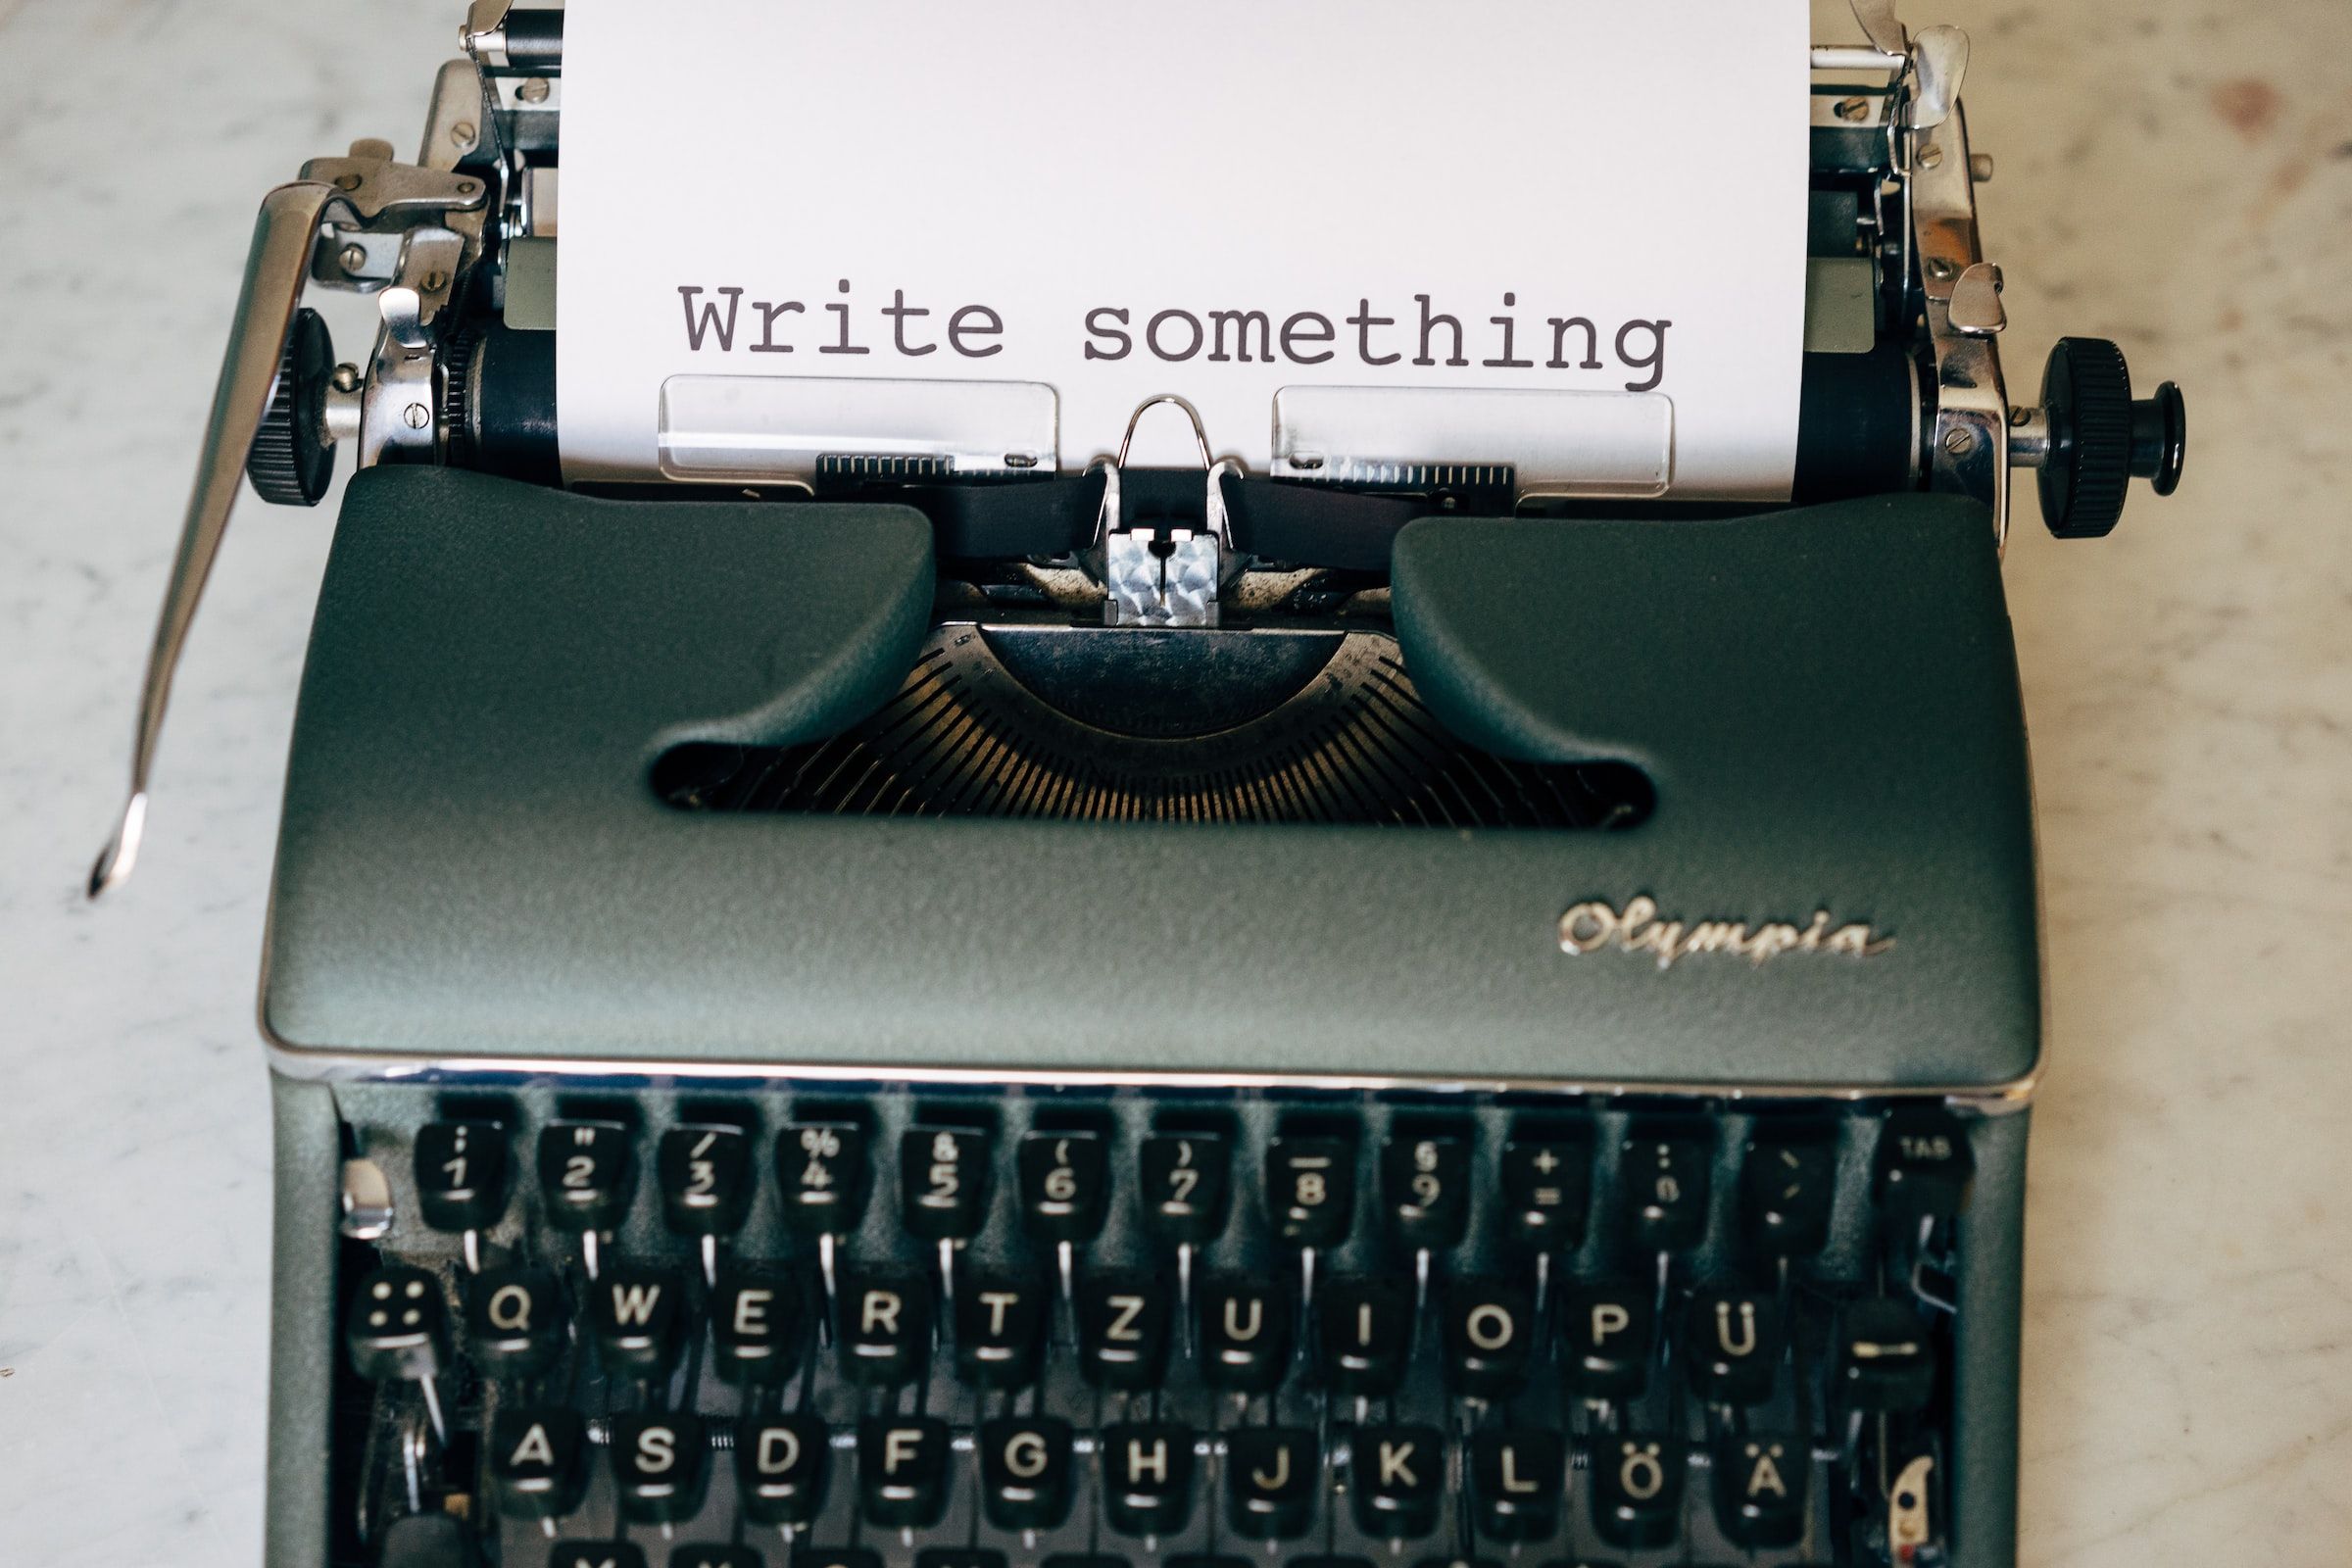 A photo of a typewriter with the words ‘Write something’ on the paper in the typewriter roll